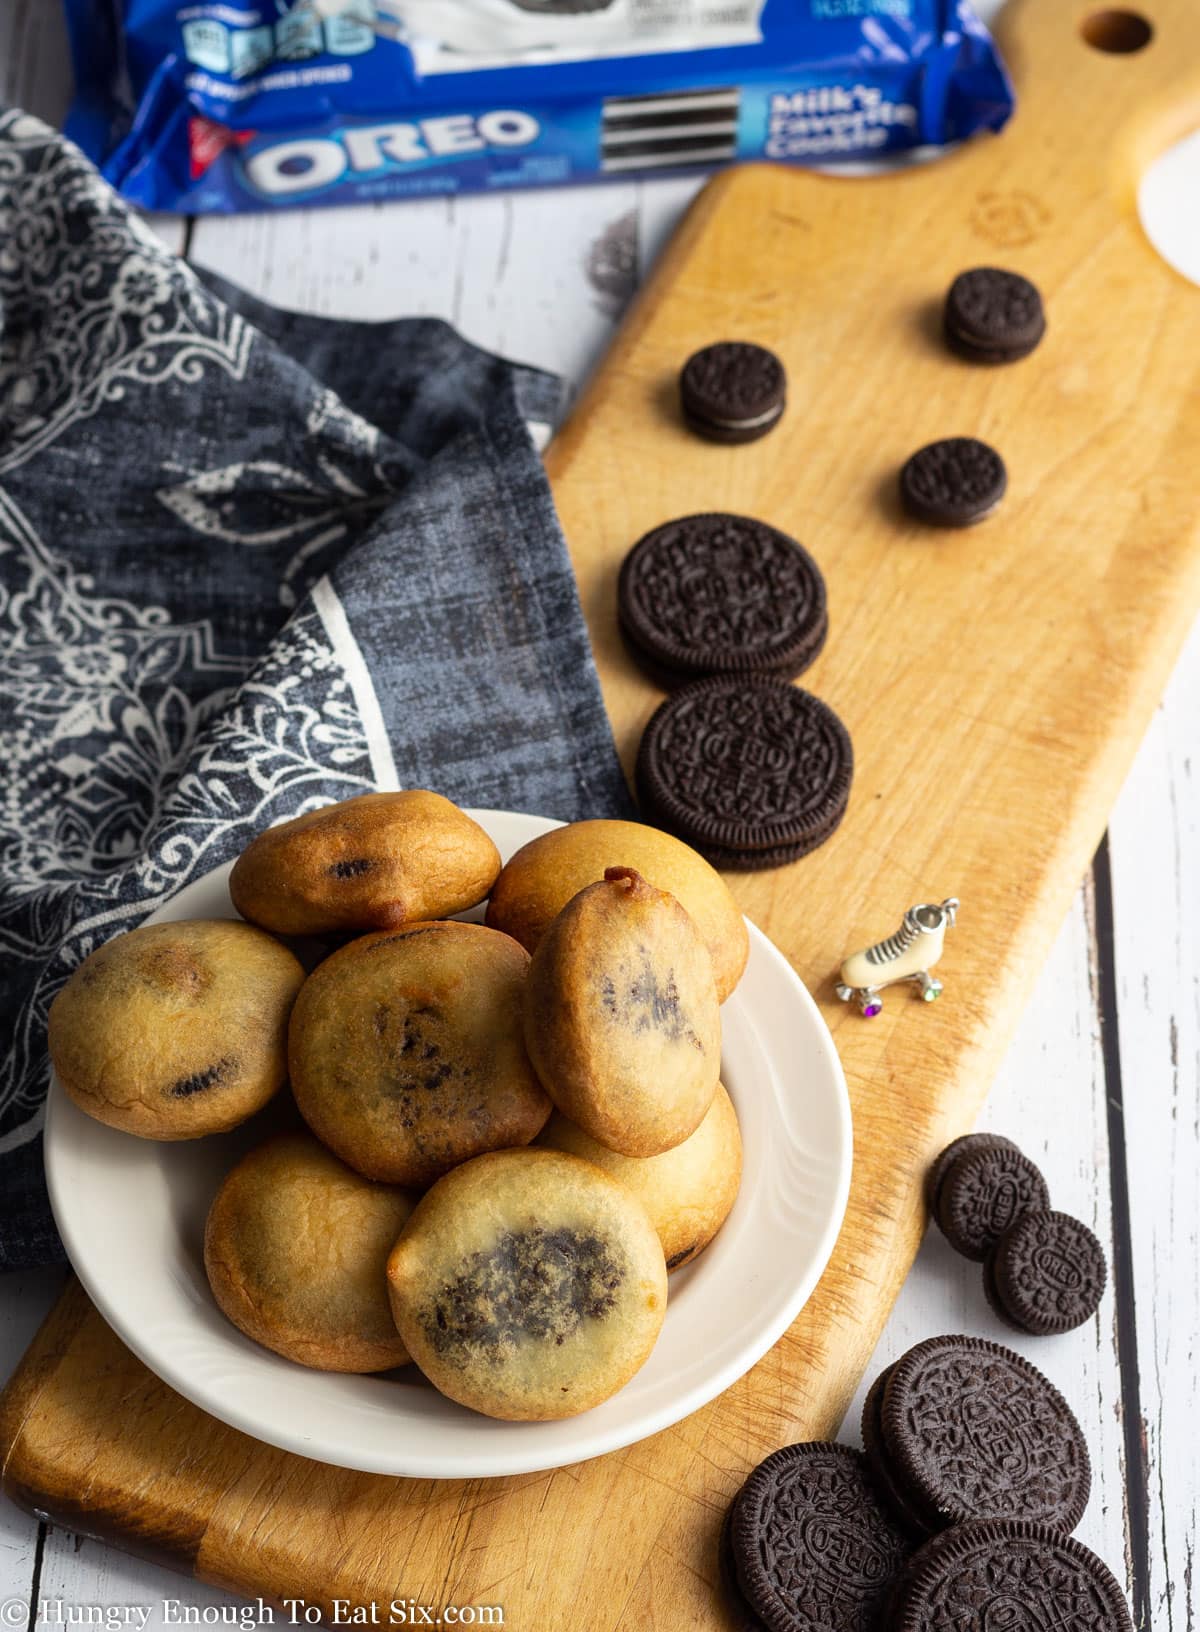 Plate of fried Oreos with regular Oreos scattered behind.